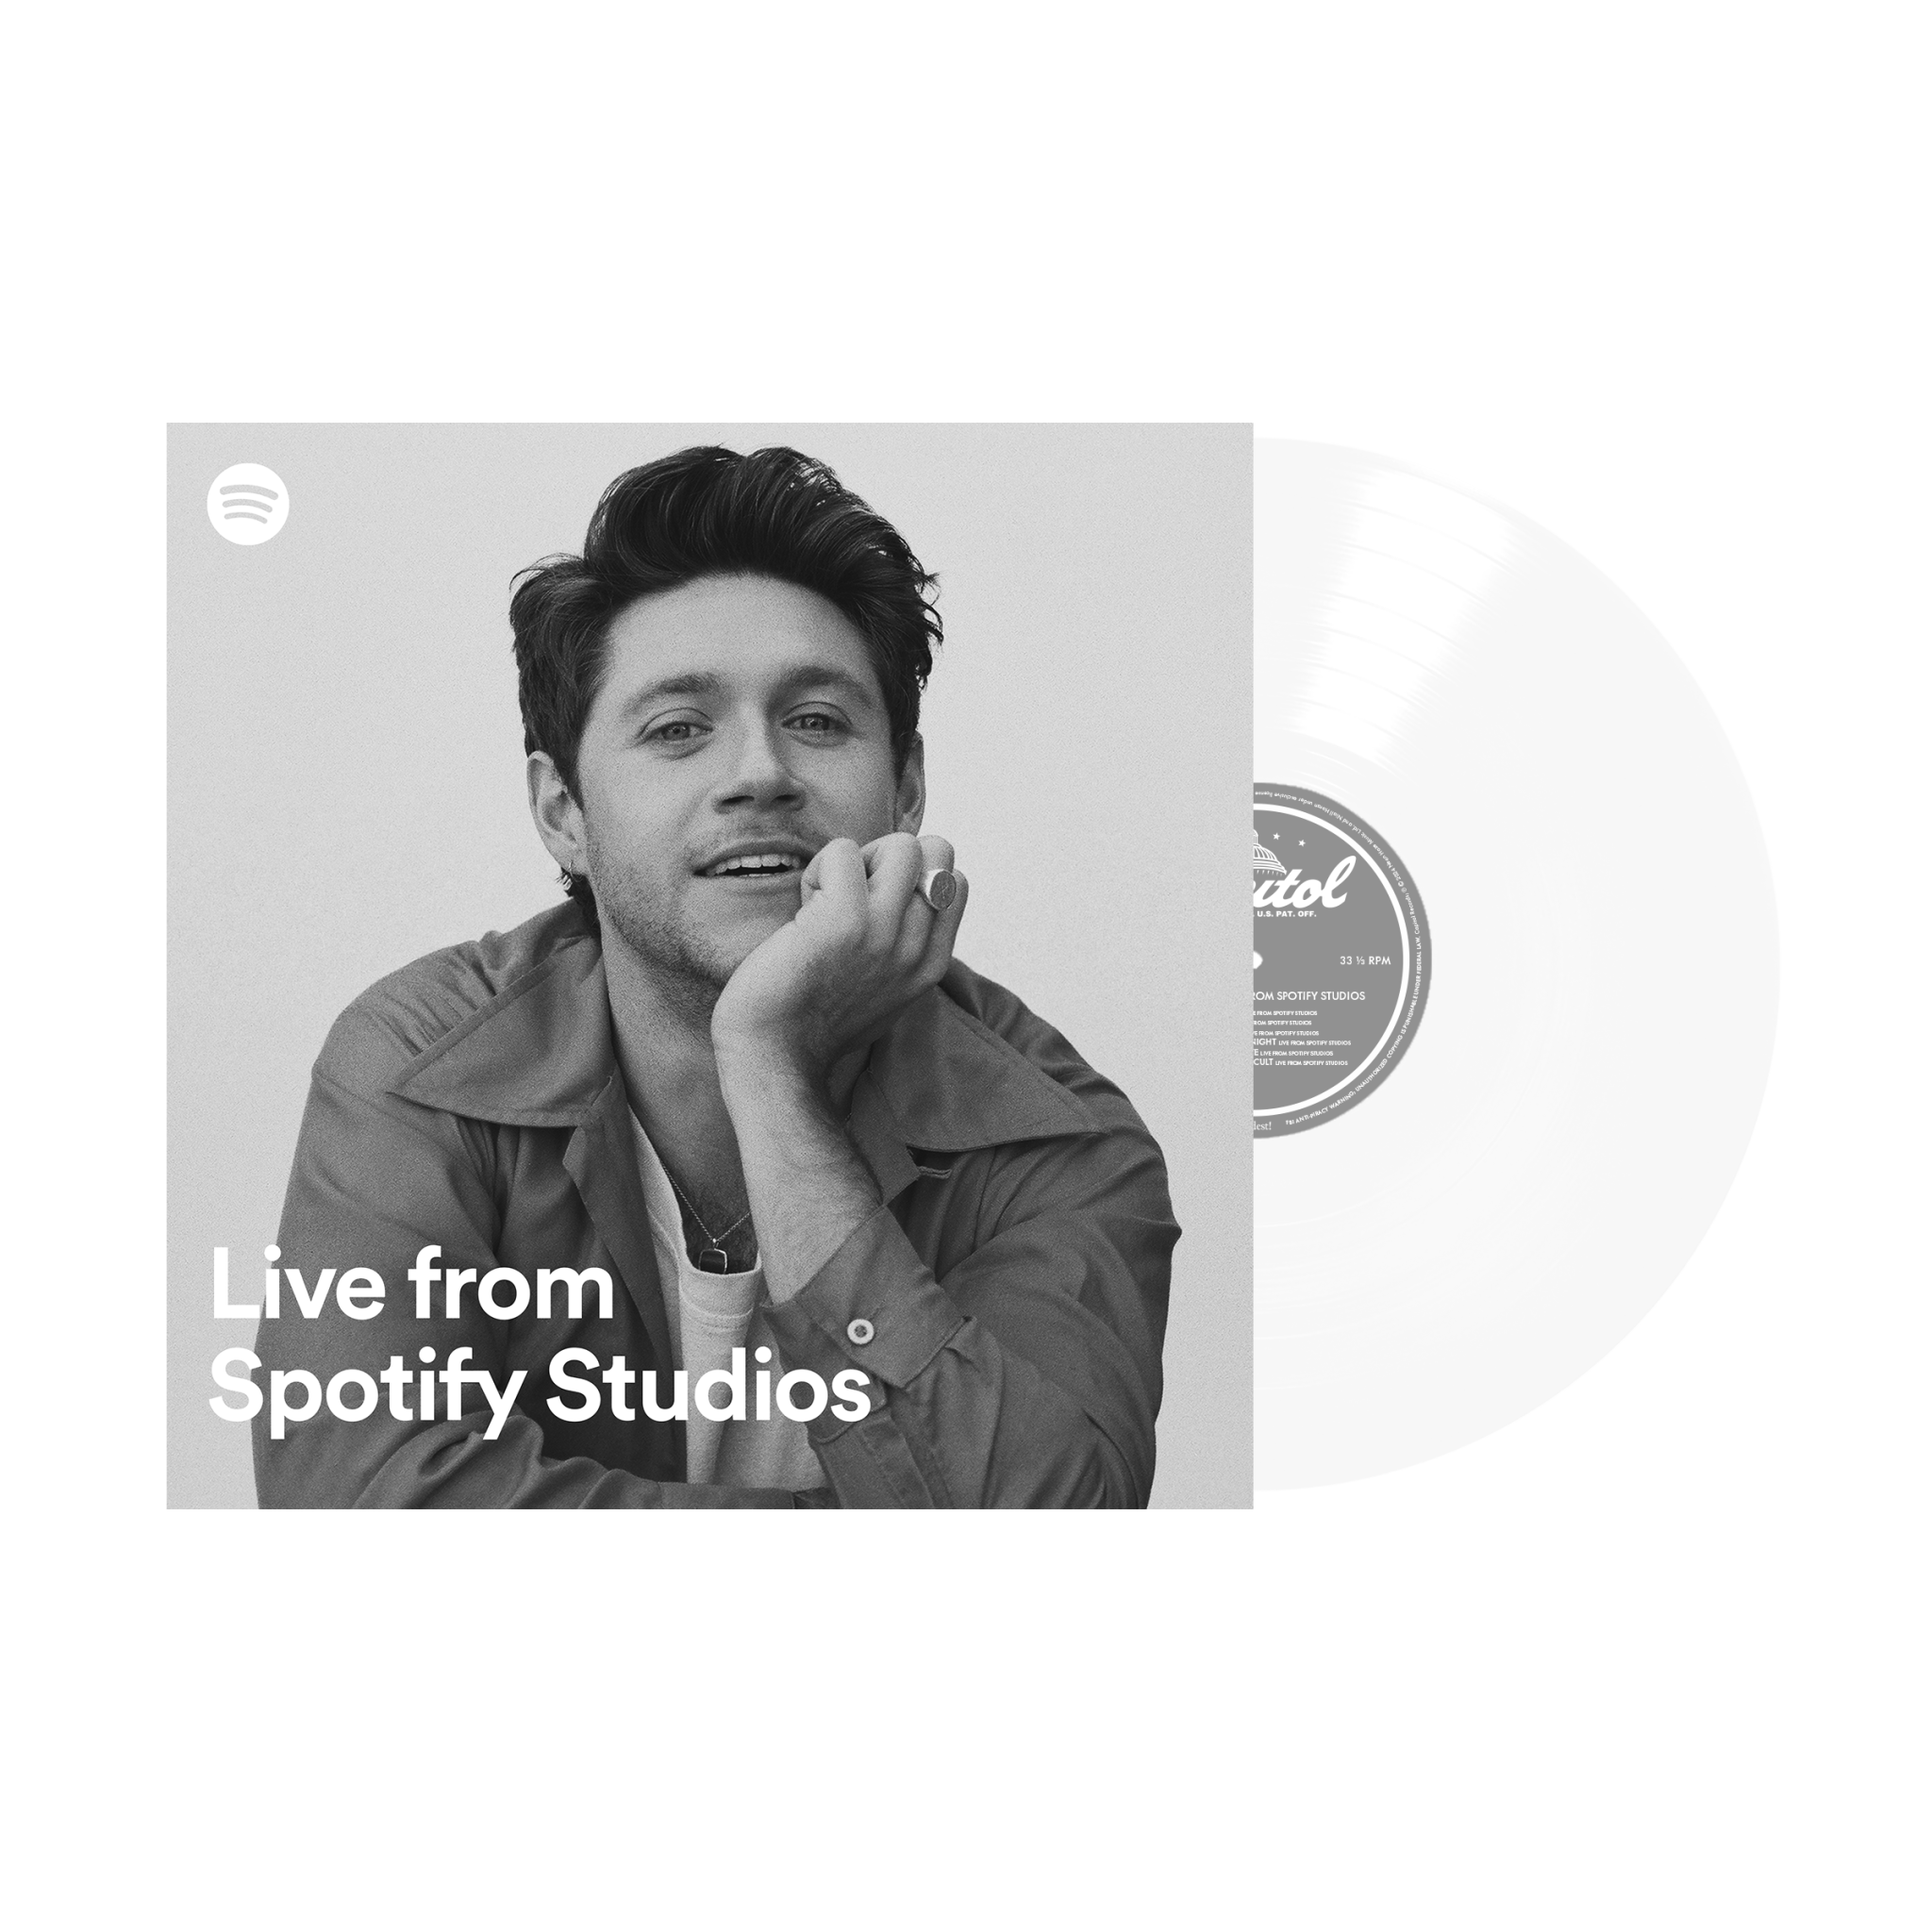 Live from Spotify Studios – Spotify Exclusive Vinyl